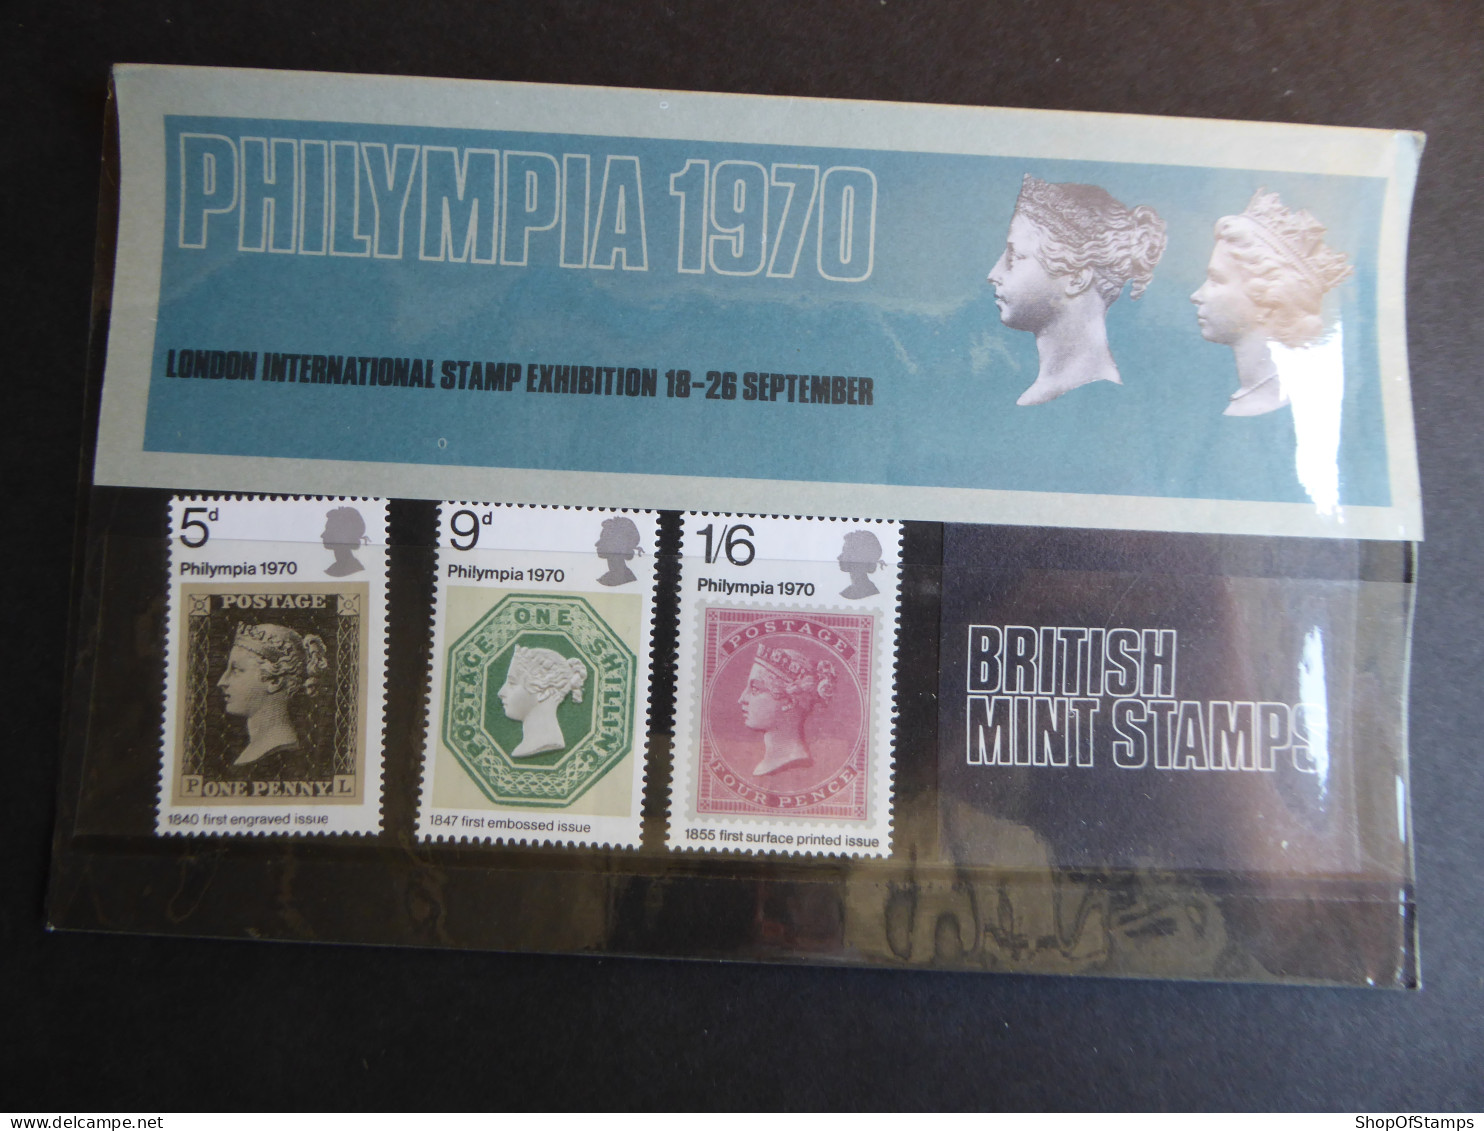 GREAT BRITAIN SG 835-37 PHILYMPIA 70 STAMP EXHIBITION PRESENTATION PACK - Sheets, Plate Blocks & Multiples